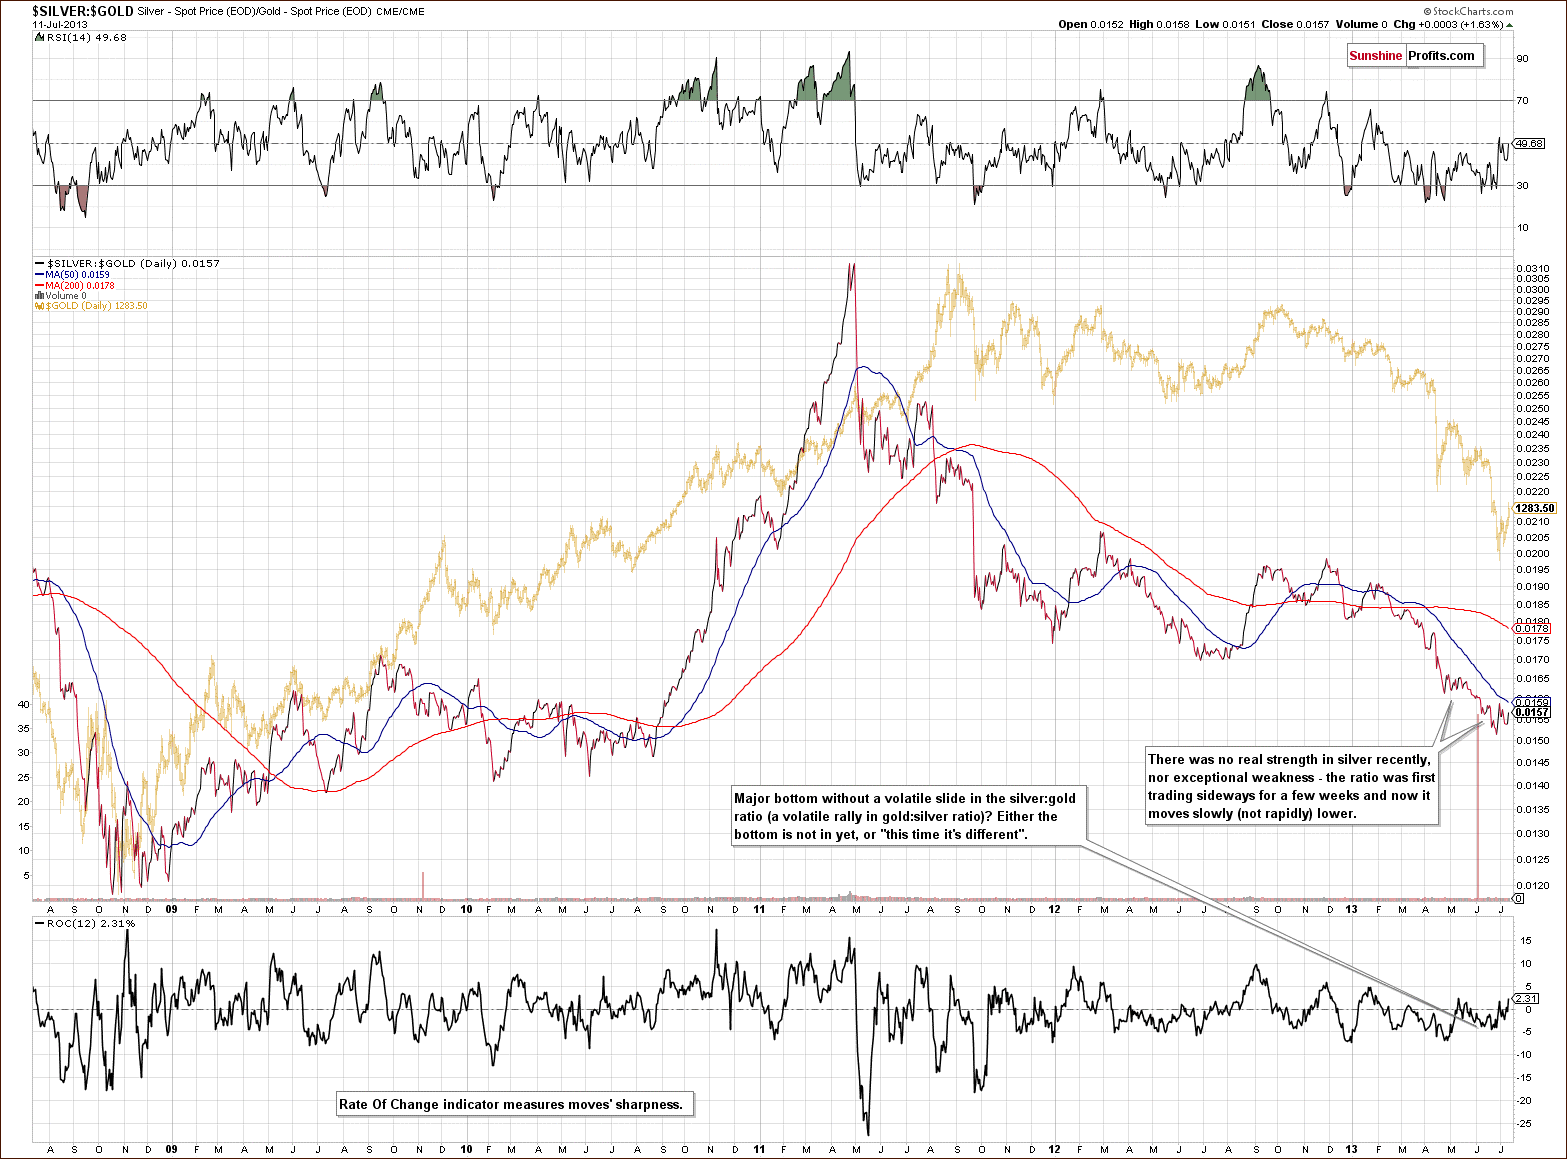 Silver to Gold ratio chart - SILVER:GOLD